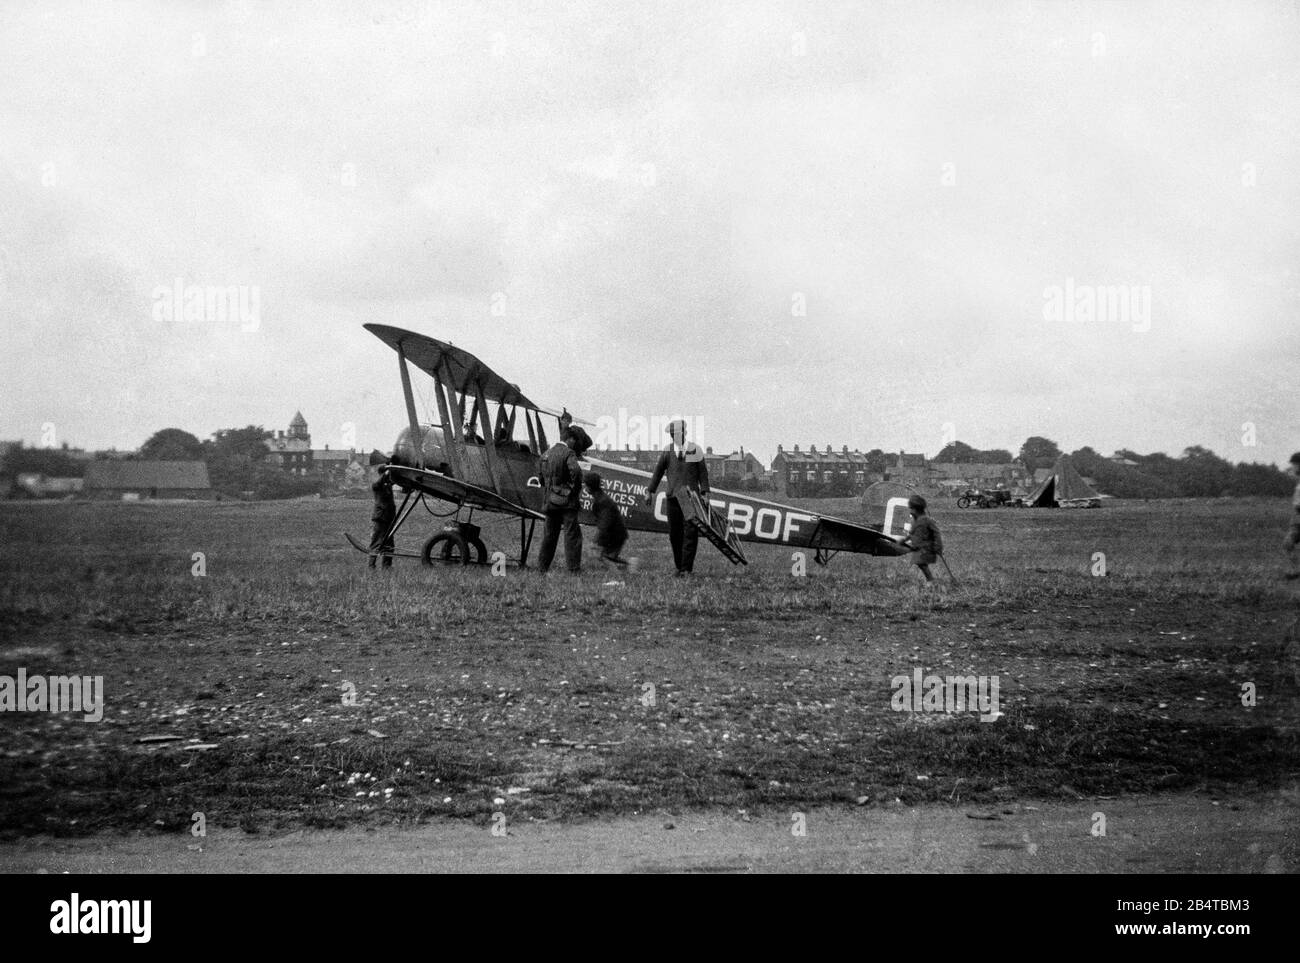 A vintage 1928 black and white photograph showing an Avro 536 Biplane, registration G-EBOF, belonging to Surrey Flying Services. Photograph taken at Croydon. This aeroplane was used mainly for pleasure flights between 1926 and 1929. Stock Photo